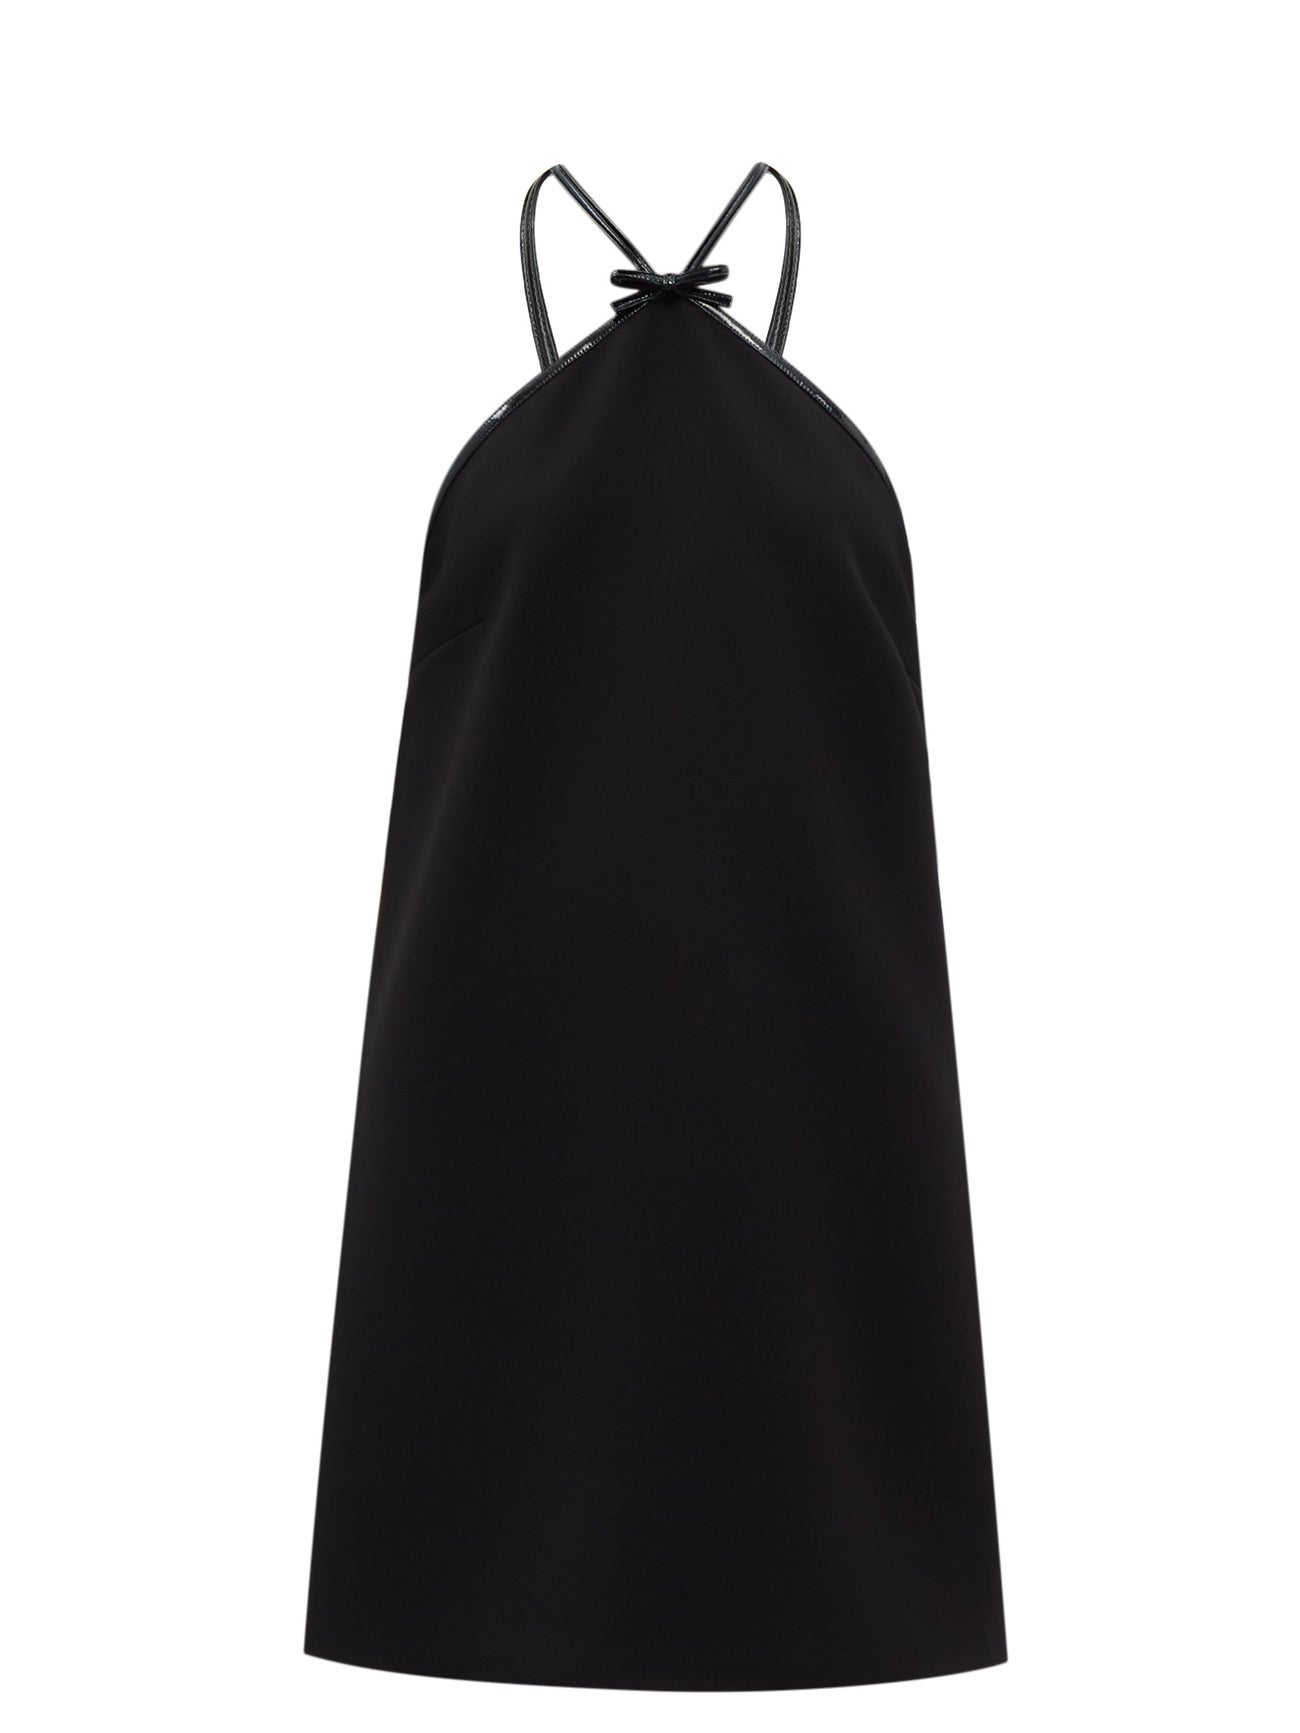 27 Tight Black Dresses Your Wardrobe Is Crying Out For | Who What Wear UK